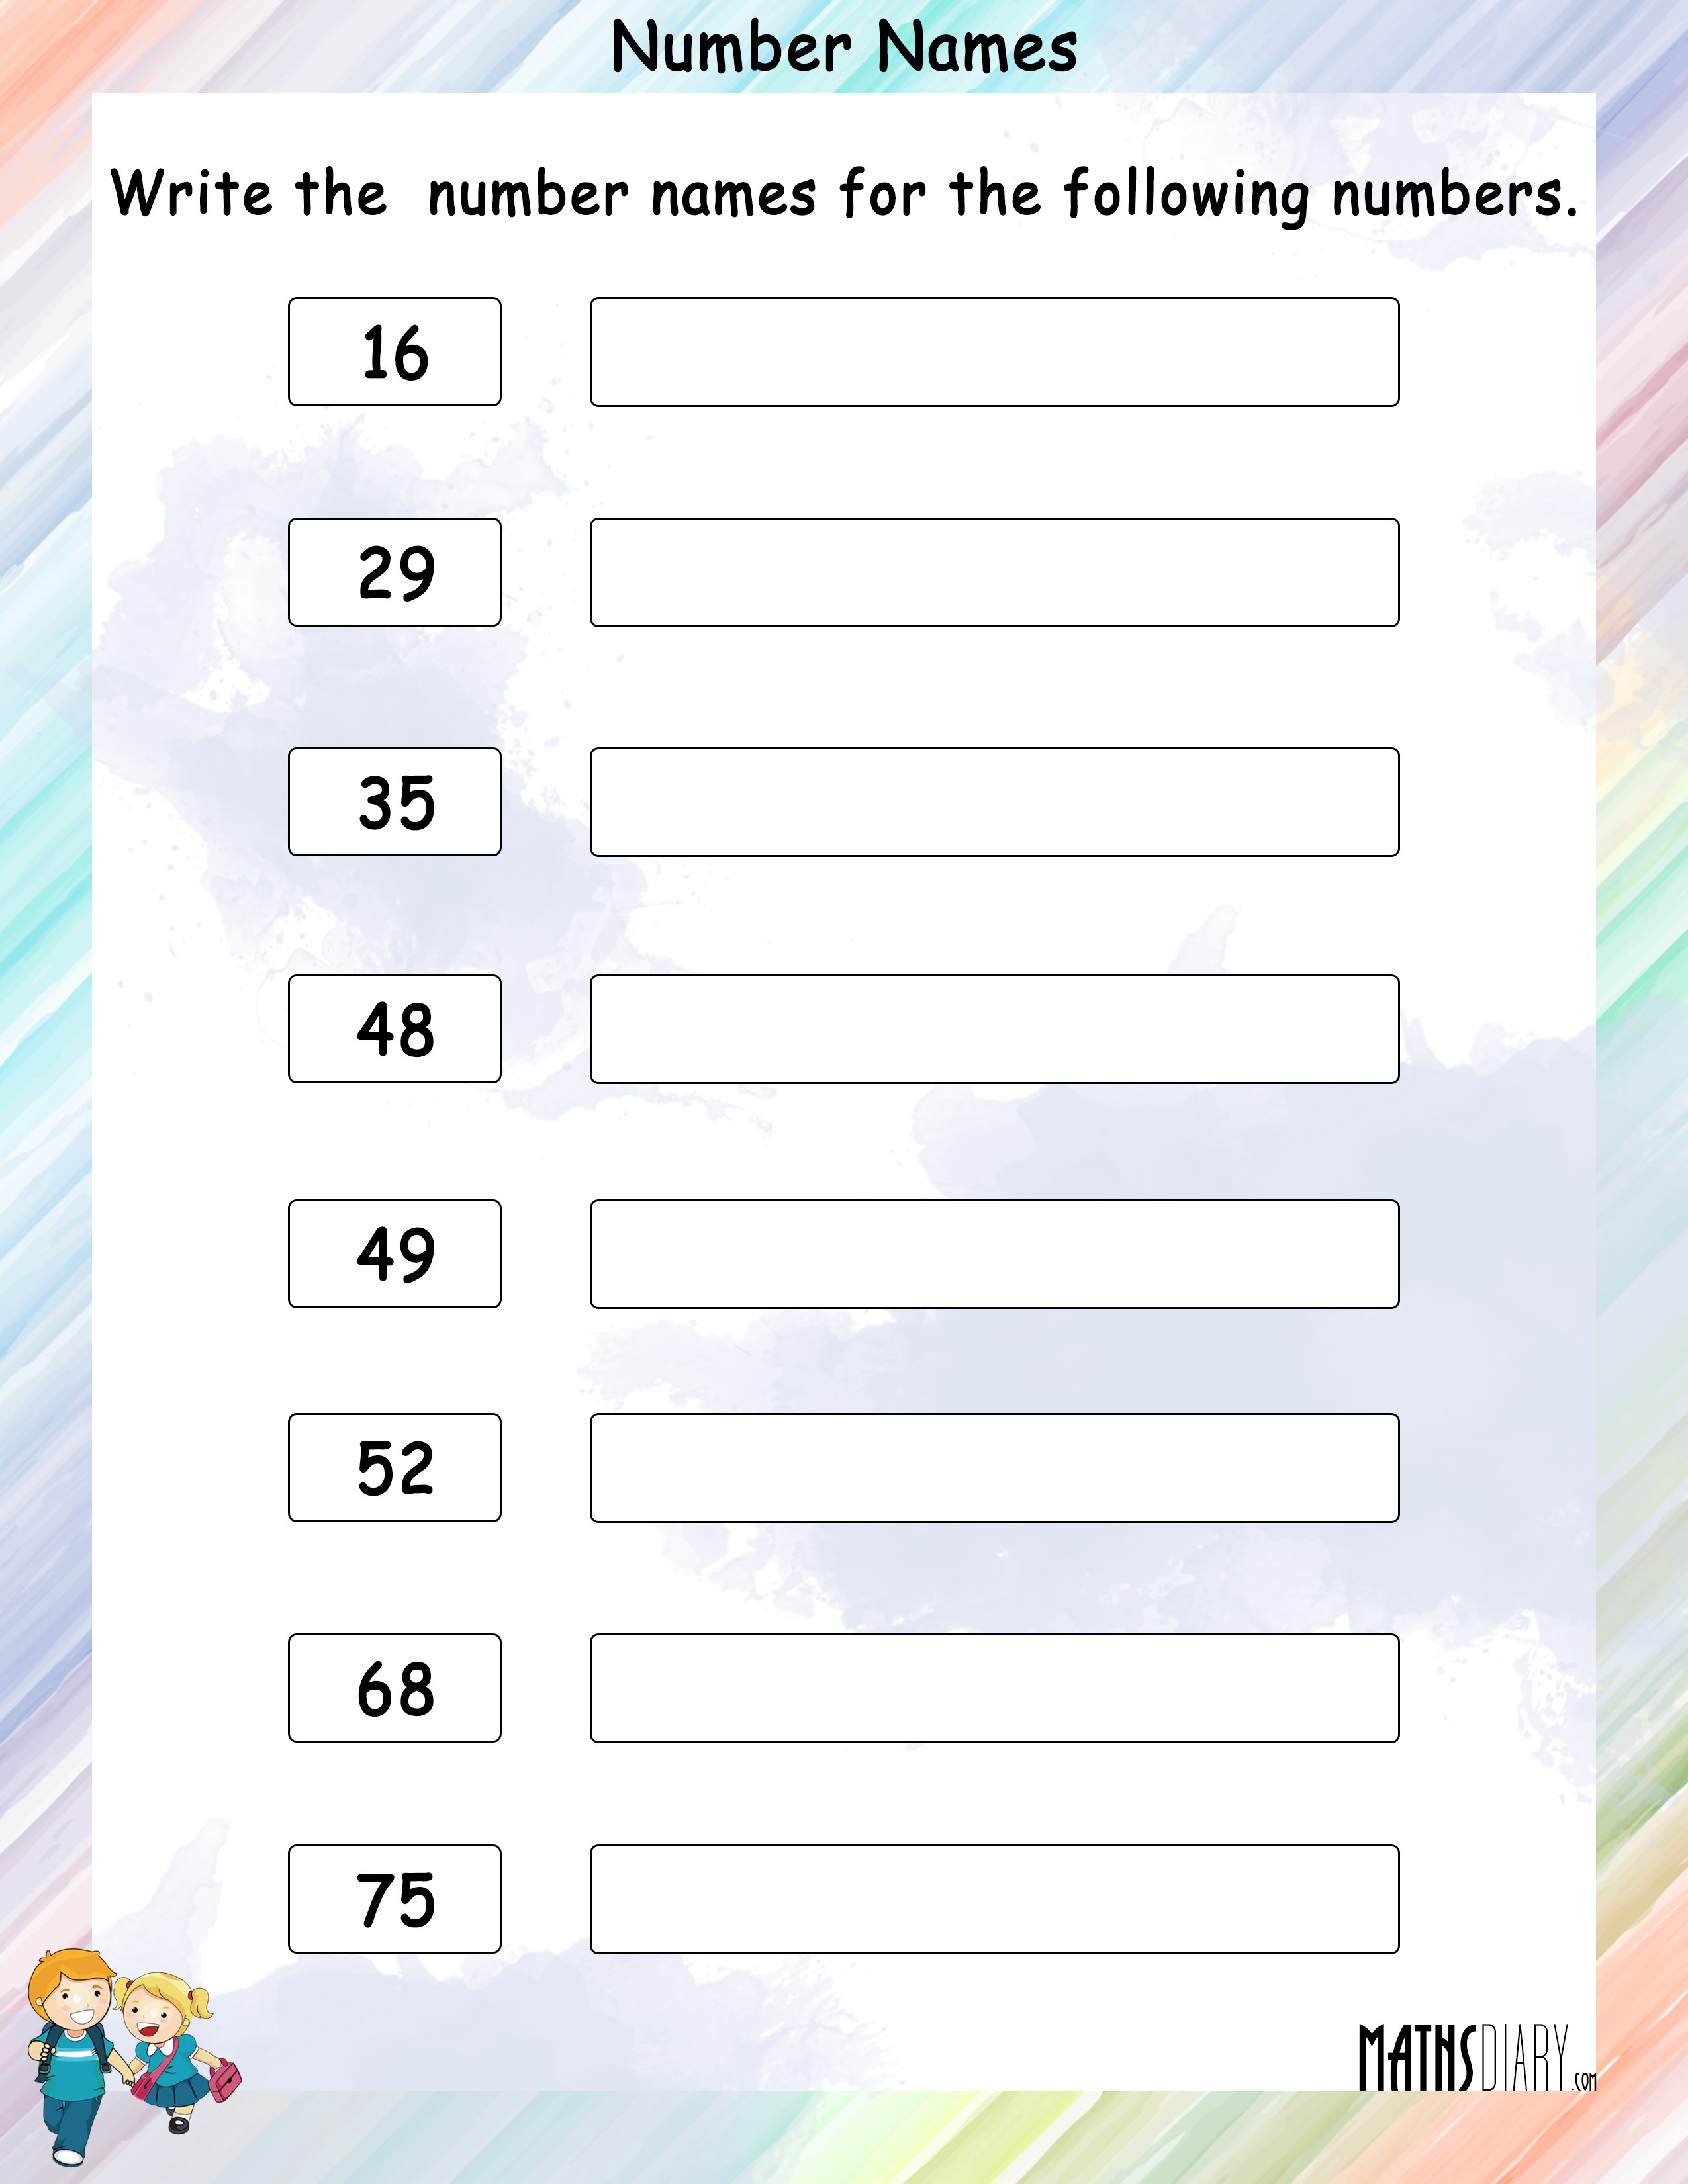 Write number names for given numbers - Math Worksheets